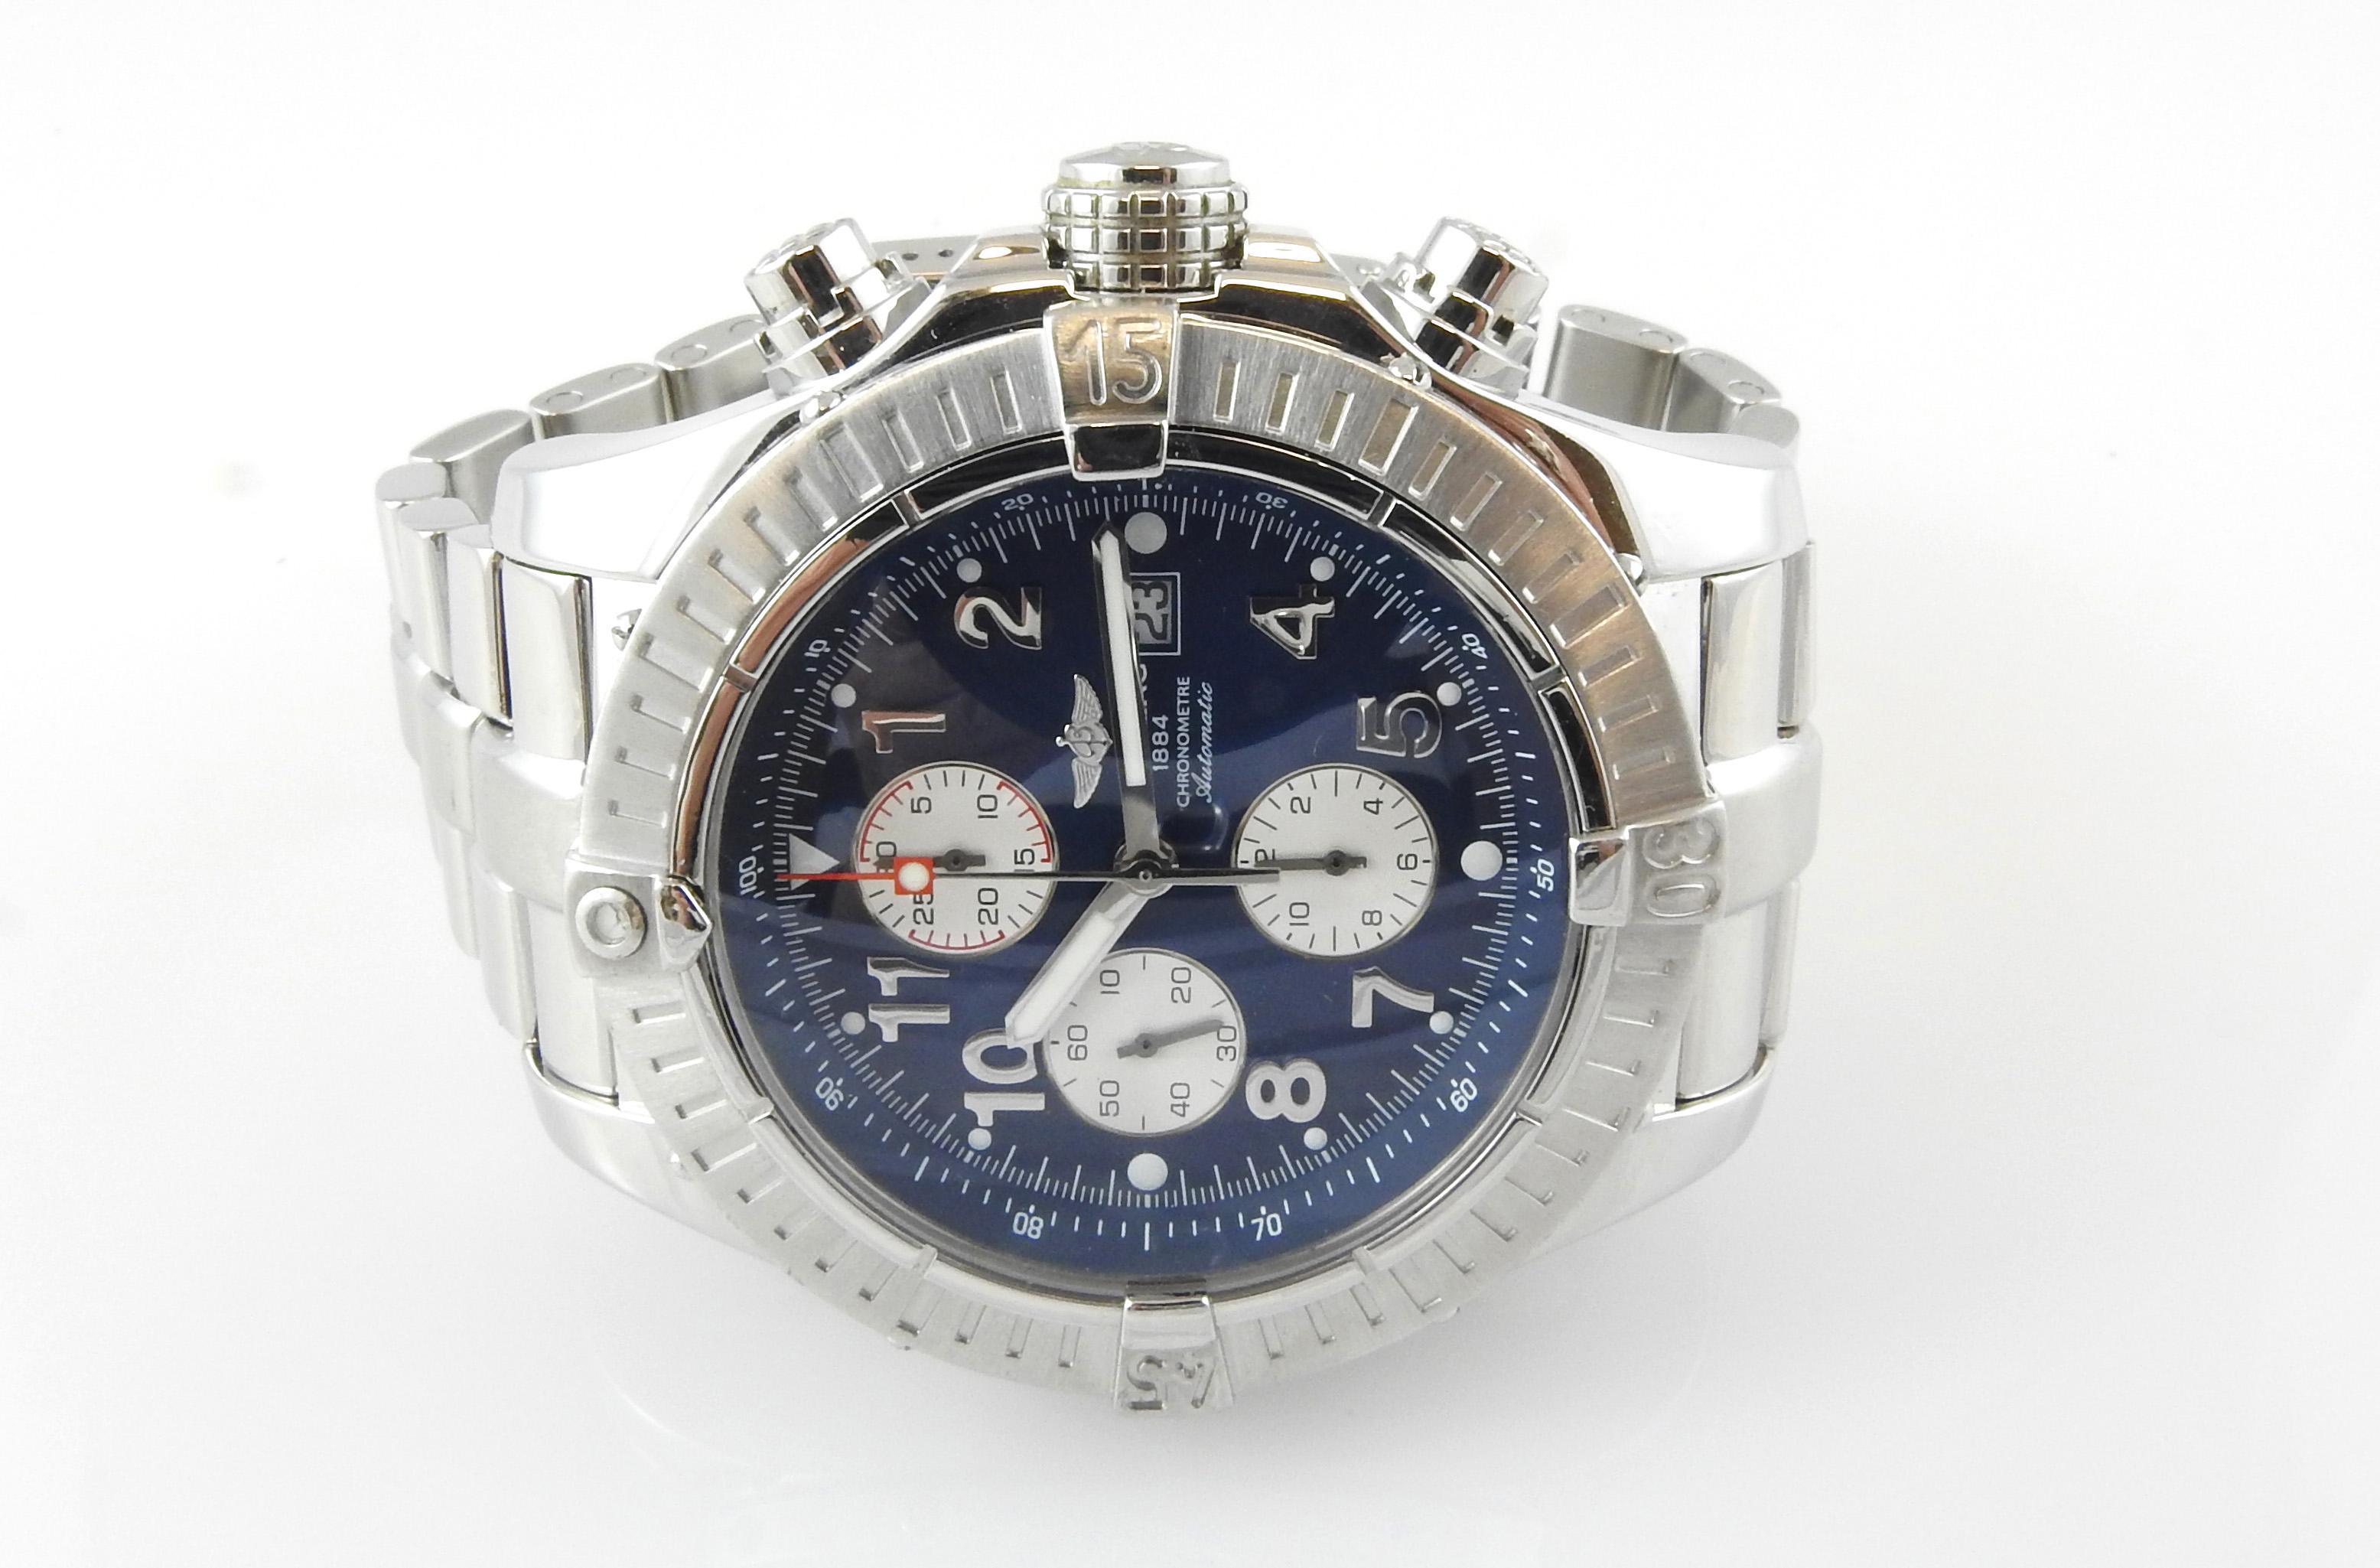 Breitling Super Avenger Men's Watch

Model: A13370
Serial: 783351

Automatic Movement

Stainless Steel Case and Stainless Steel Band

Blue Dial / Silver Arabic Numerals

Chronograph

48mm case

Band fits up to approx. 7 3/4